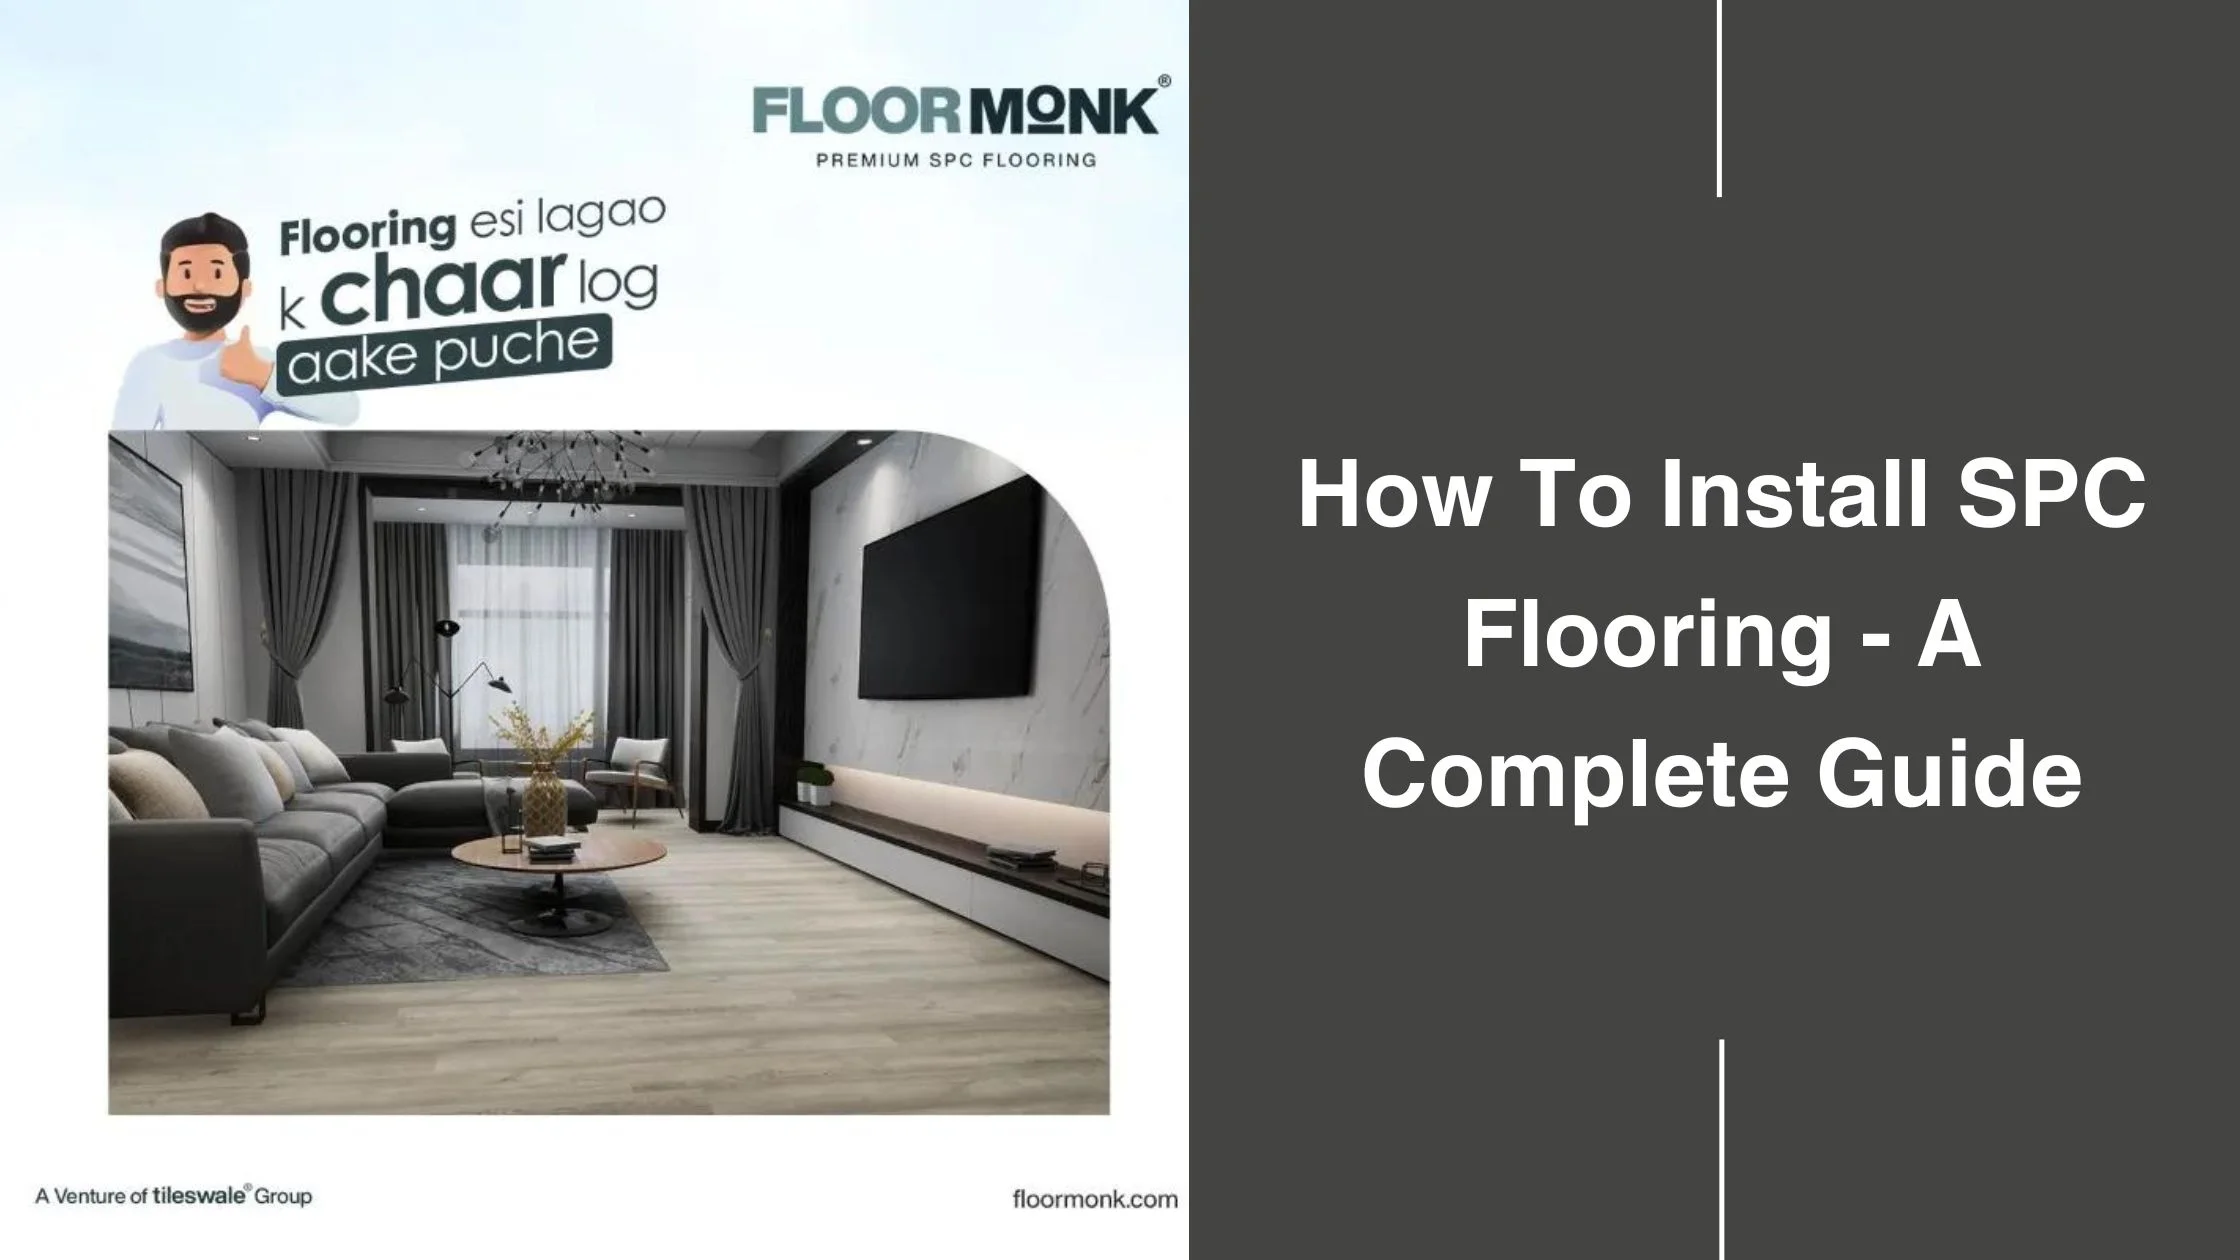 How To Install SPC Flooring - A Complete Guide